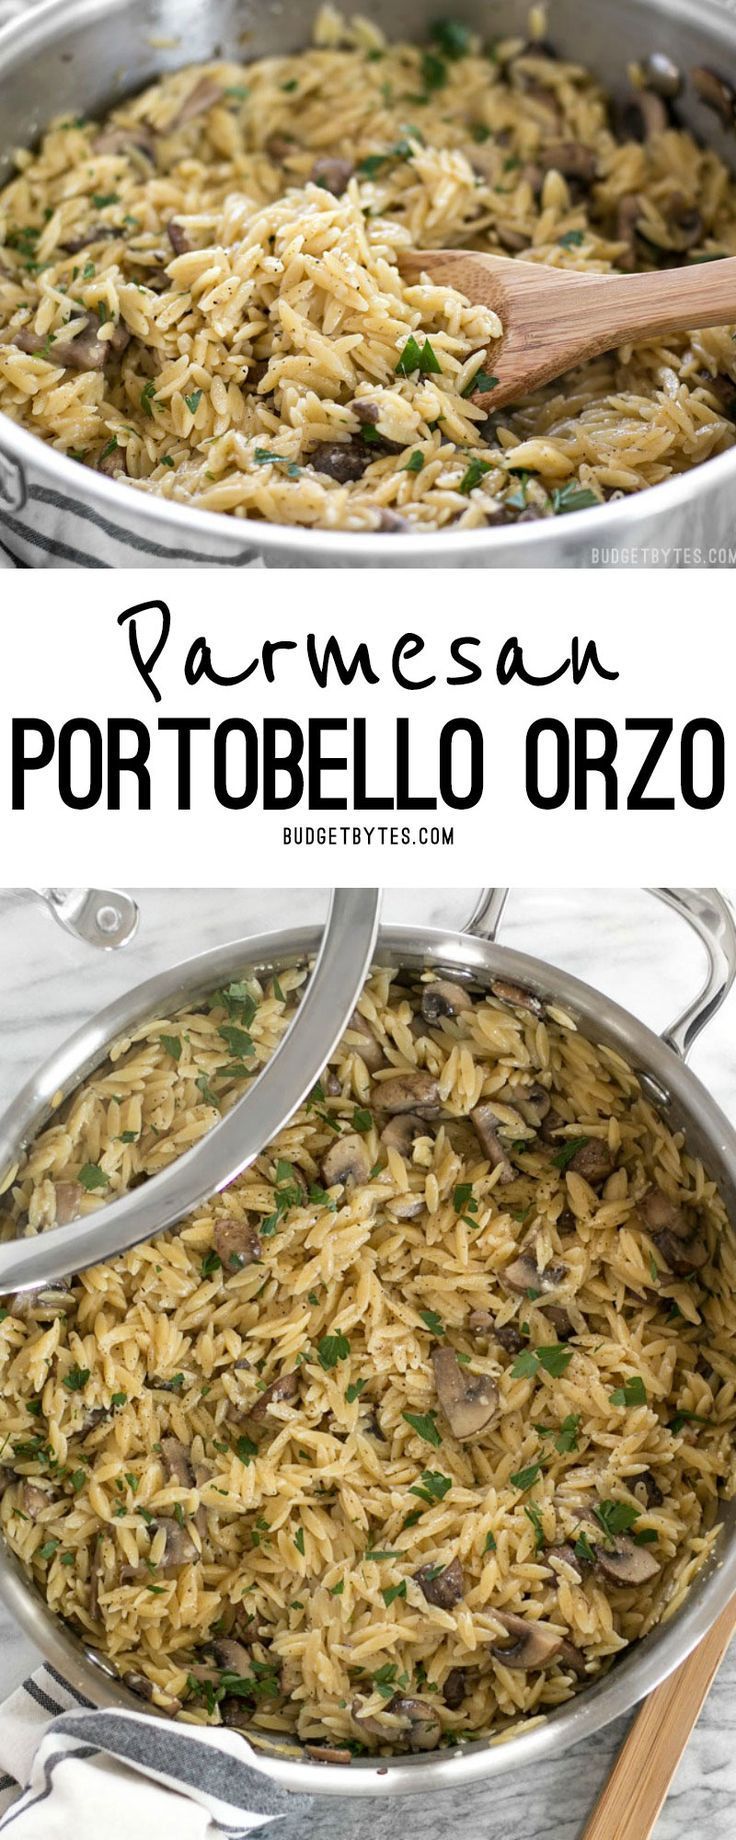 This super simple and flavorful Parmesan Portobello Orzo will become your next go-to side dish. Ready in 30 minutes, it pairs with